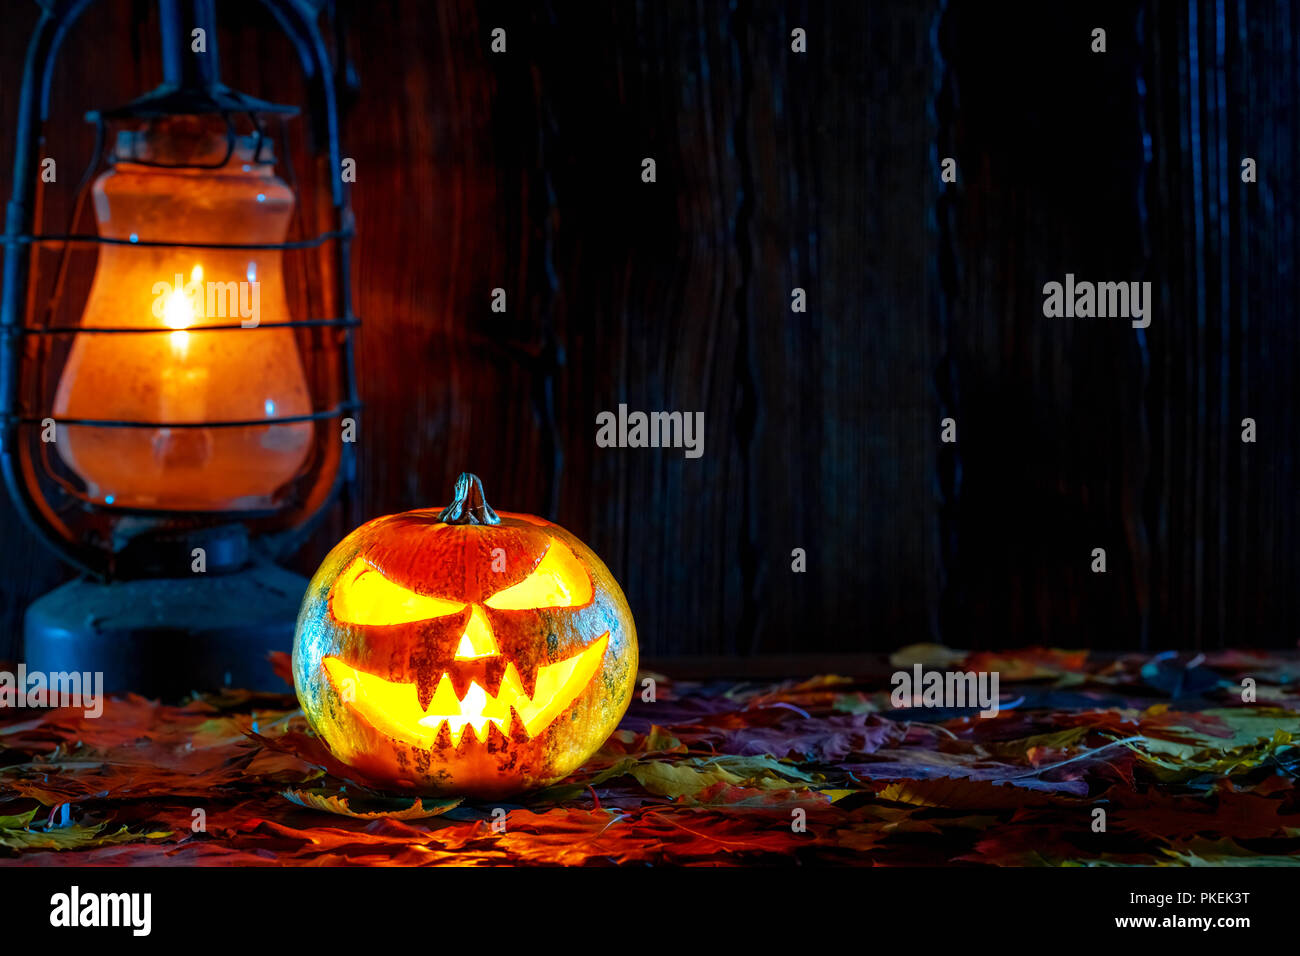 Halloween pumpkin with glowing face on a wooden background with candles. Stock Photo